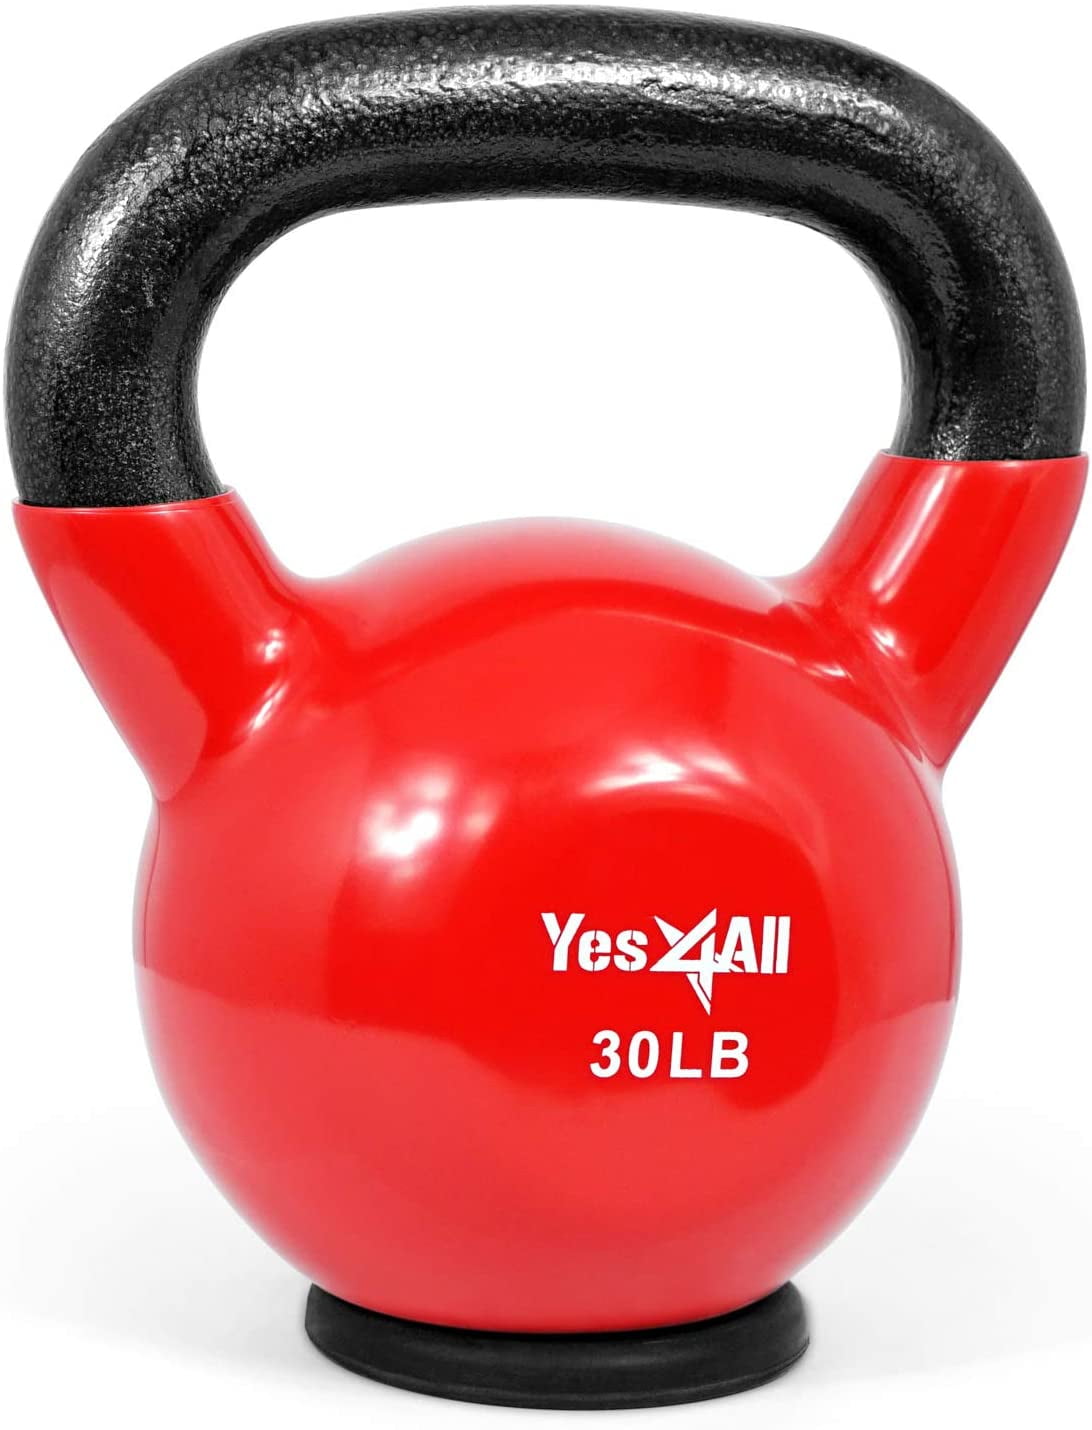 45 Pound Total weight CAP Barbell Rubber Coated Kettlebell Set 10 lb 15 lb 20lb 